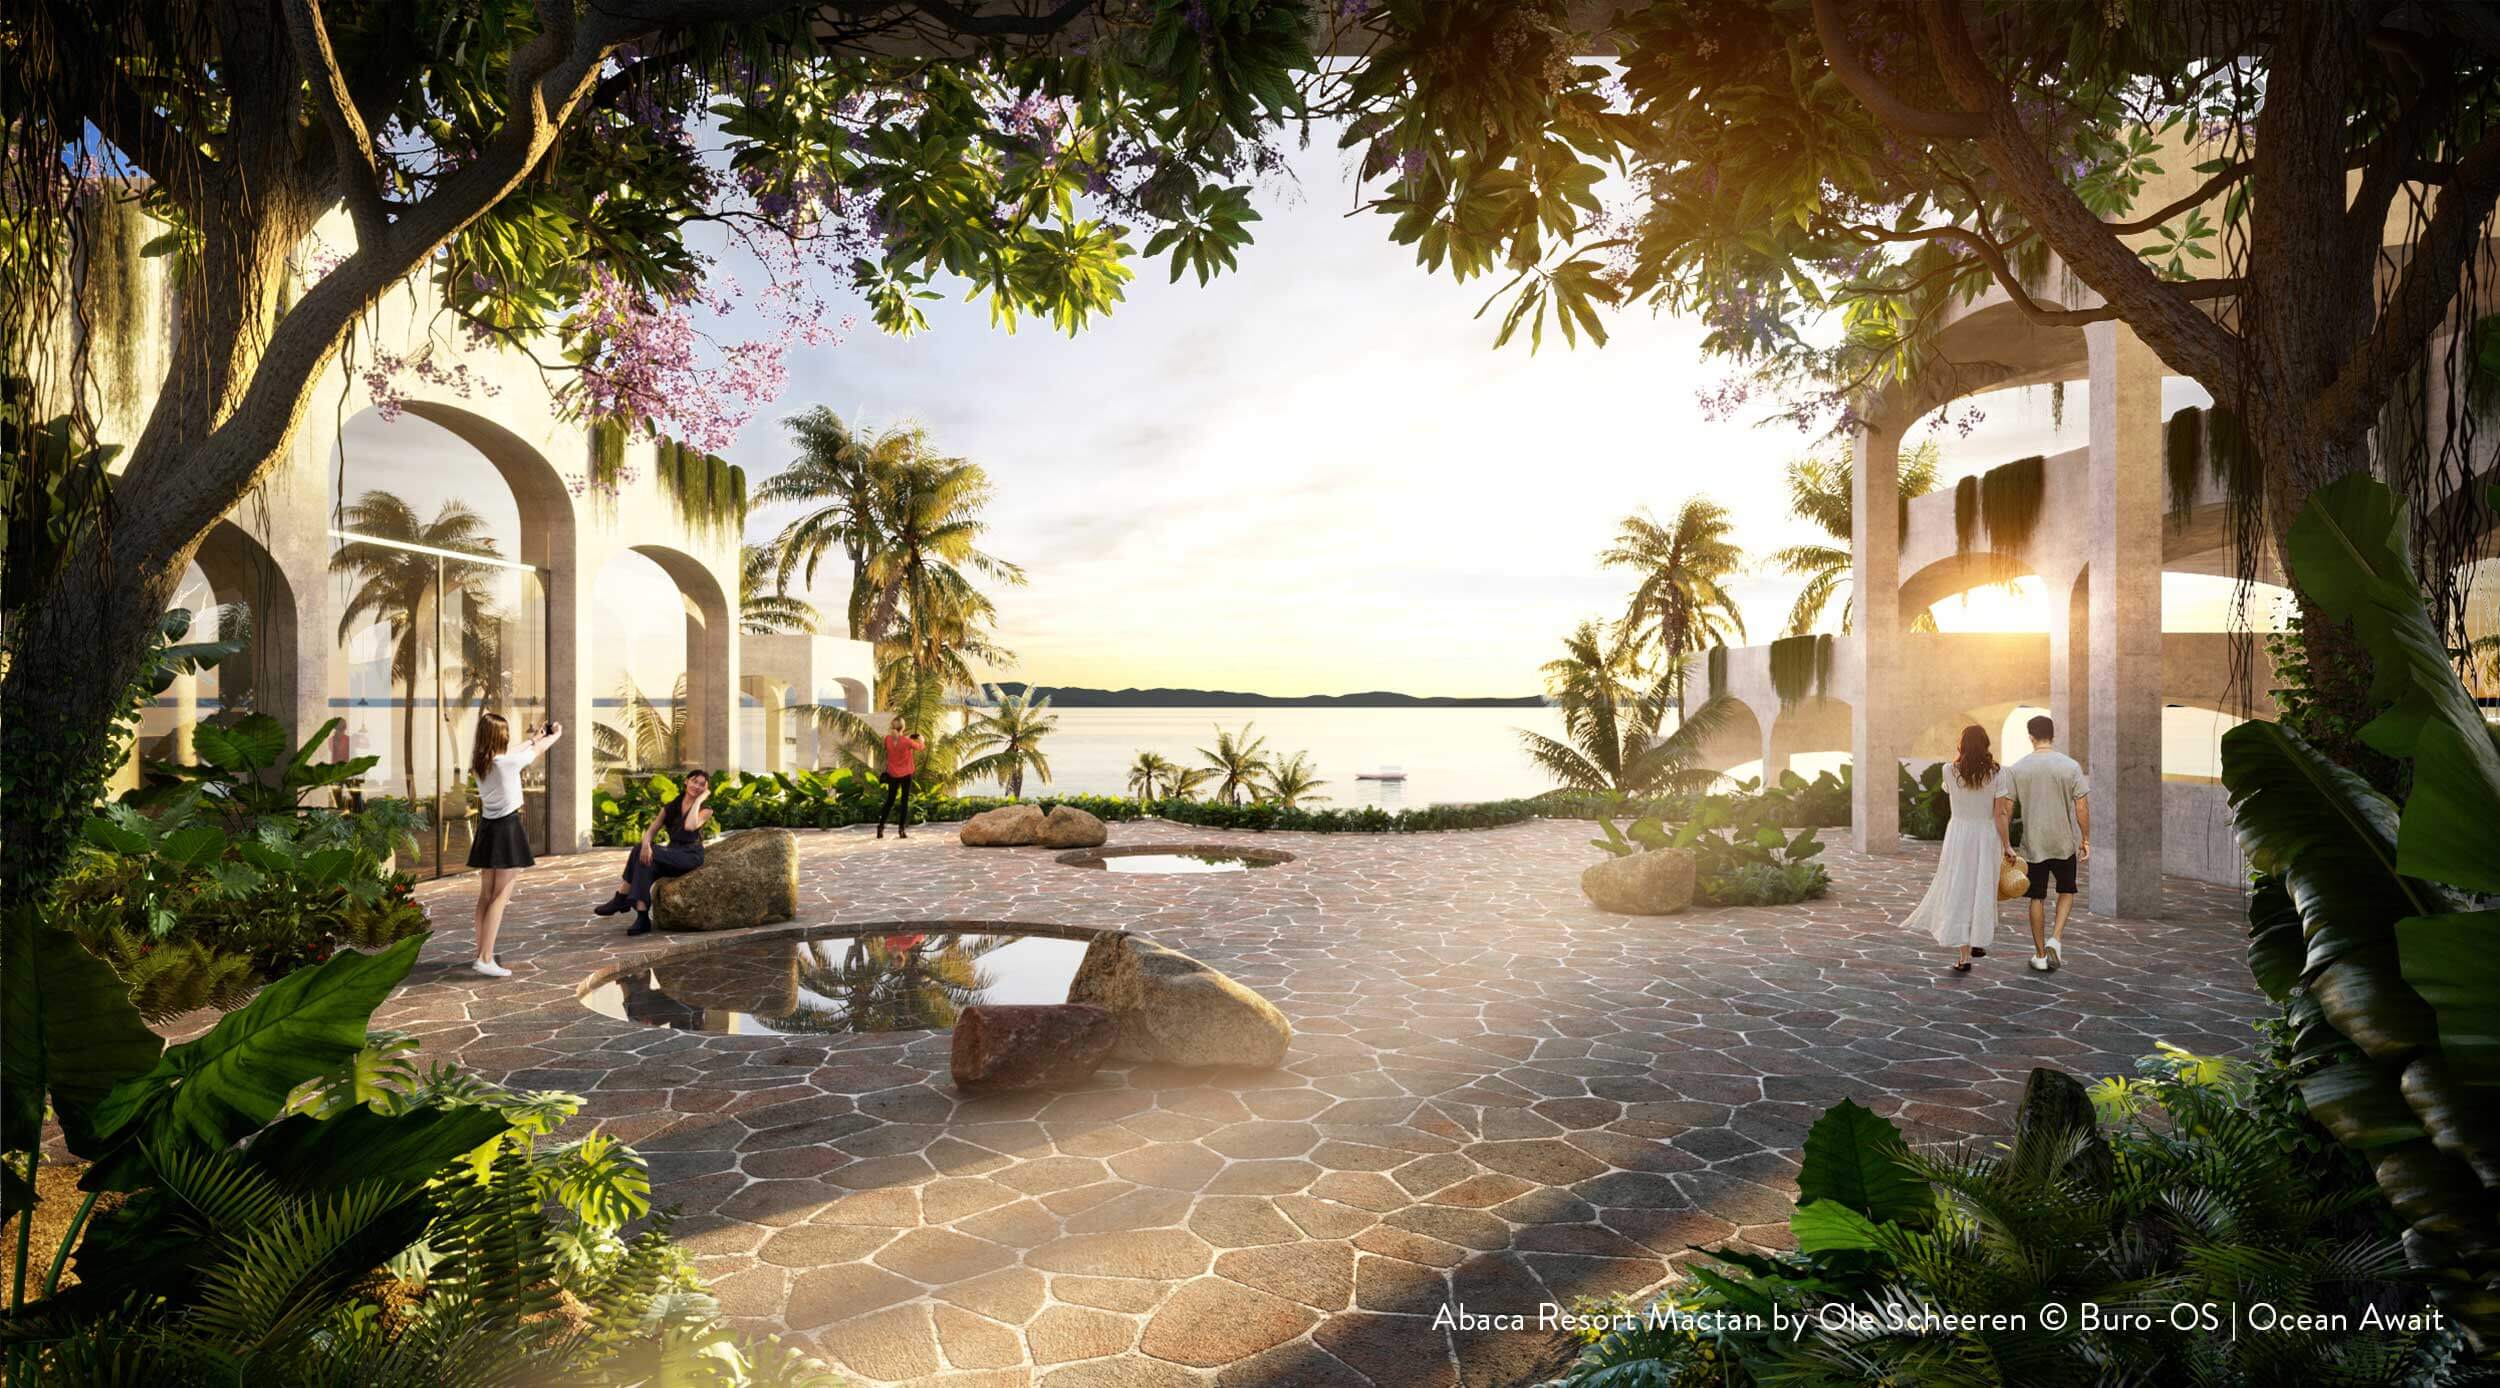 Set to be completed in 2024, the new Abaca Resort Mactan is CLI’s very first resort development and will feature a timeless Sky Villas concept to serve as the platform for memorable getaways. The photo above is a perspective of Büro Ole Scheeren’s architecture and innovative design of the re-imagined luxury resort to open in 2024.